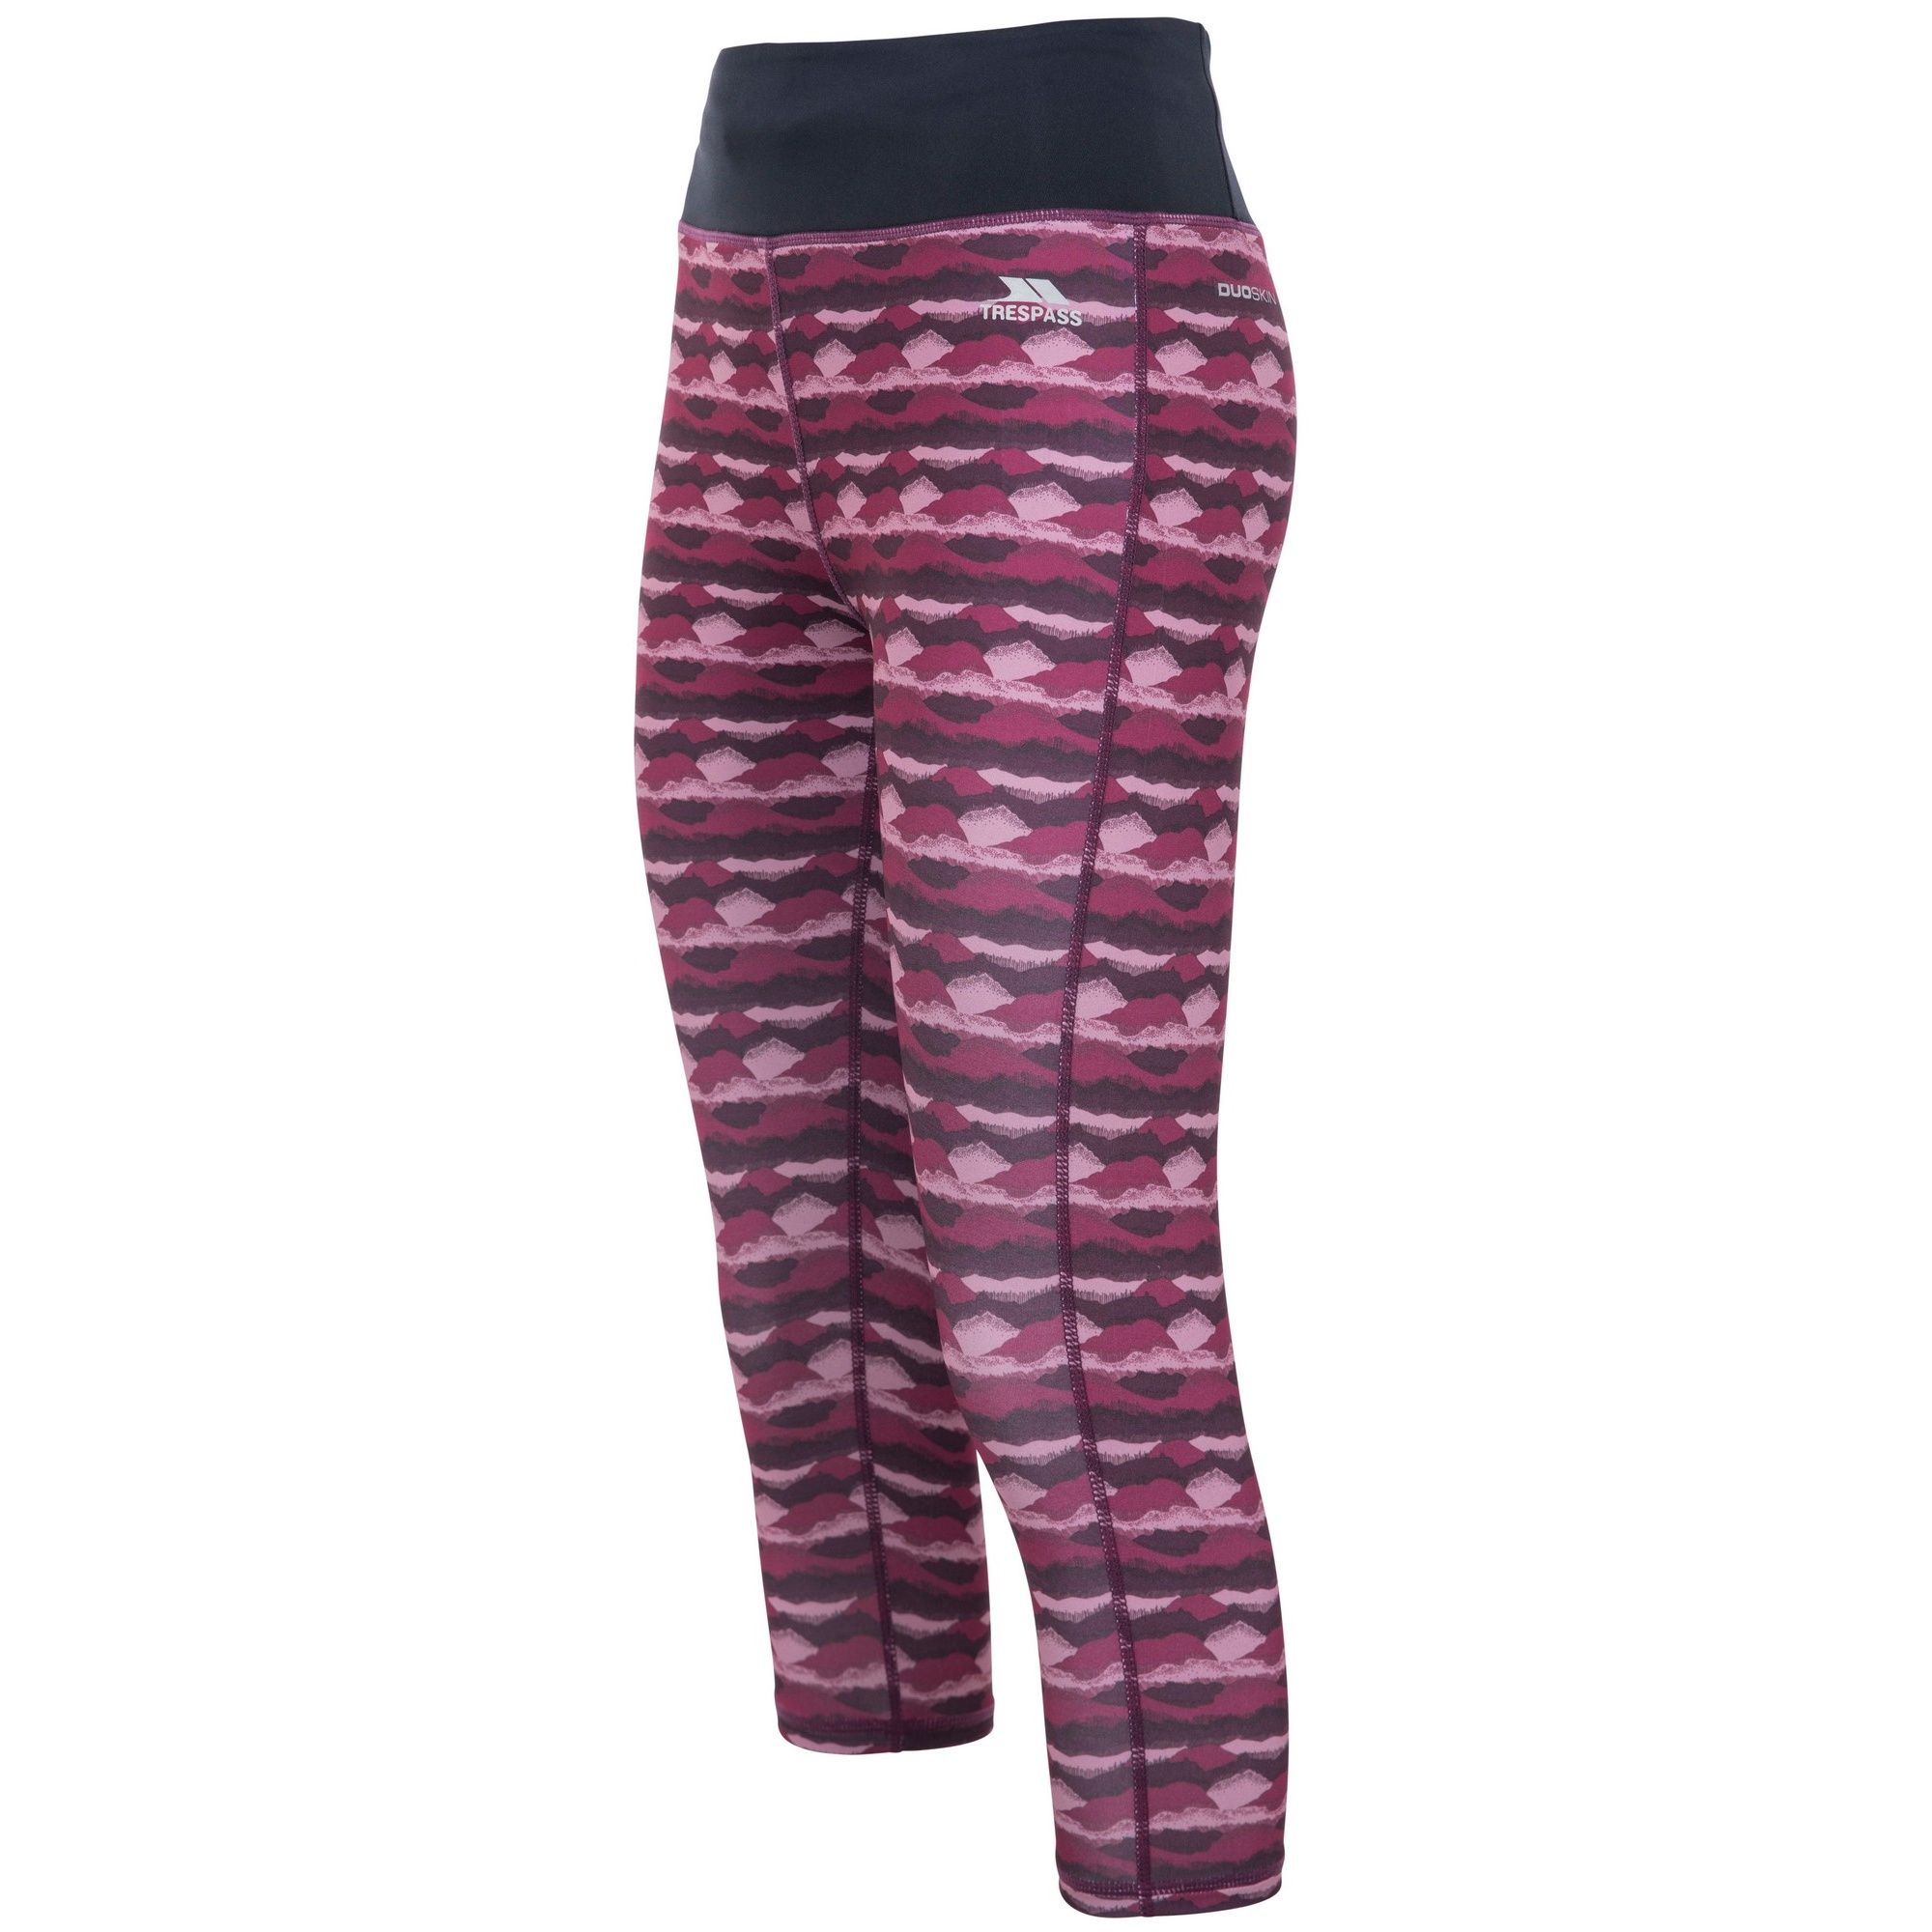 90% Polyester, 10% Elastane. Fully printed. 3/4 length. Supportive waistband. Drawcord at waist. Zip pocket at back waist. Reflective printed logos. Wicking. Quick dry. Trespass Womens Waist Sizing (approx): XS/8 - 25in/66cm, S/10 - 28in/71cm, M/12 - 30in/76cm, L/14 - 32in/81cm, XL/16 - 34in/86cm, XXL/18 - 36in/91.5cm.